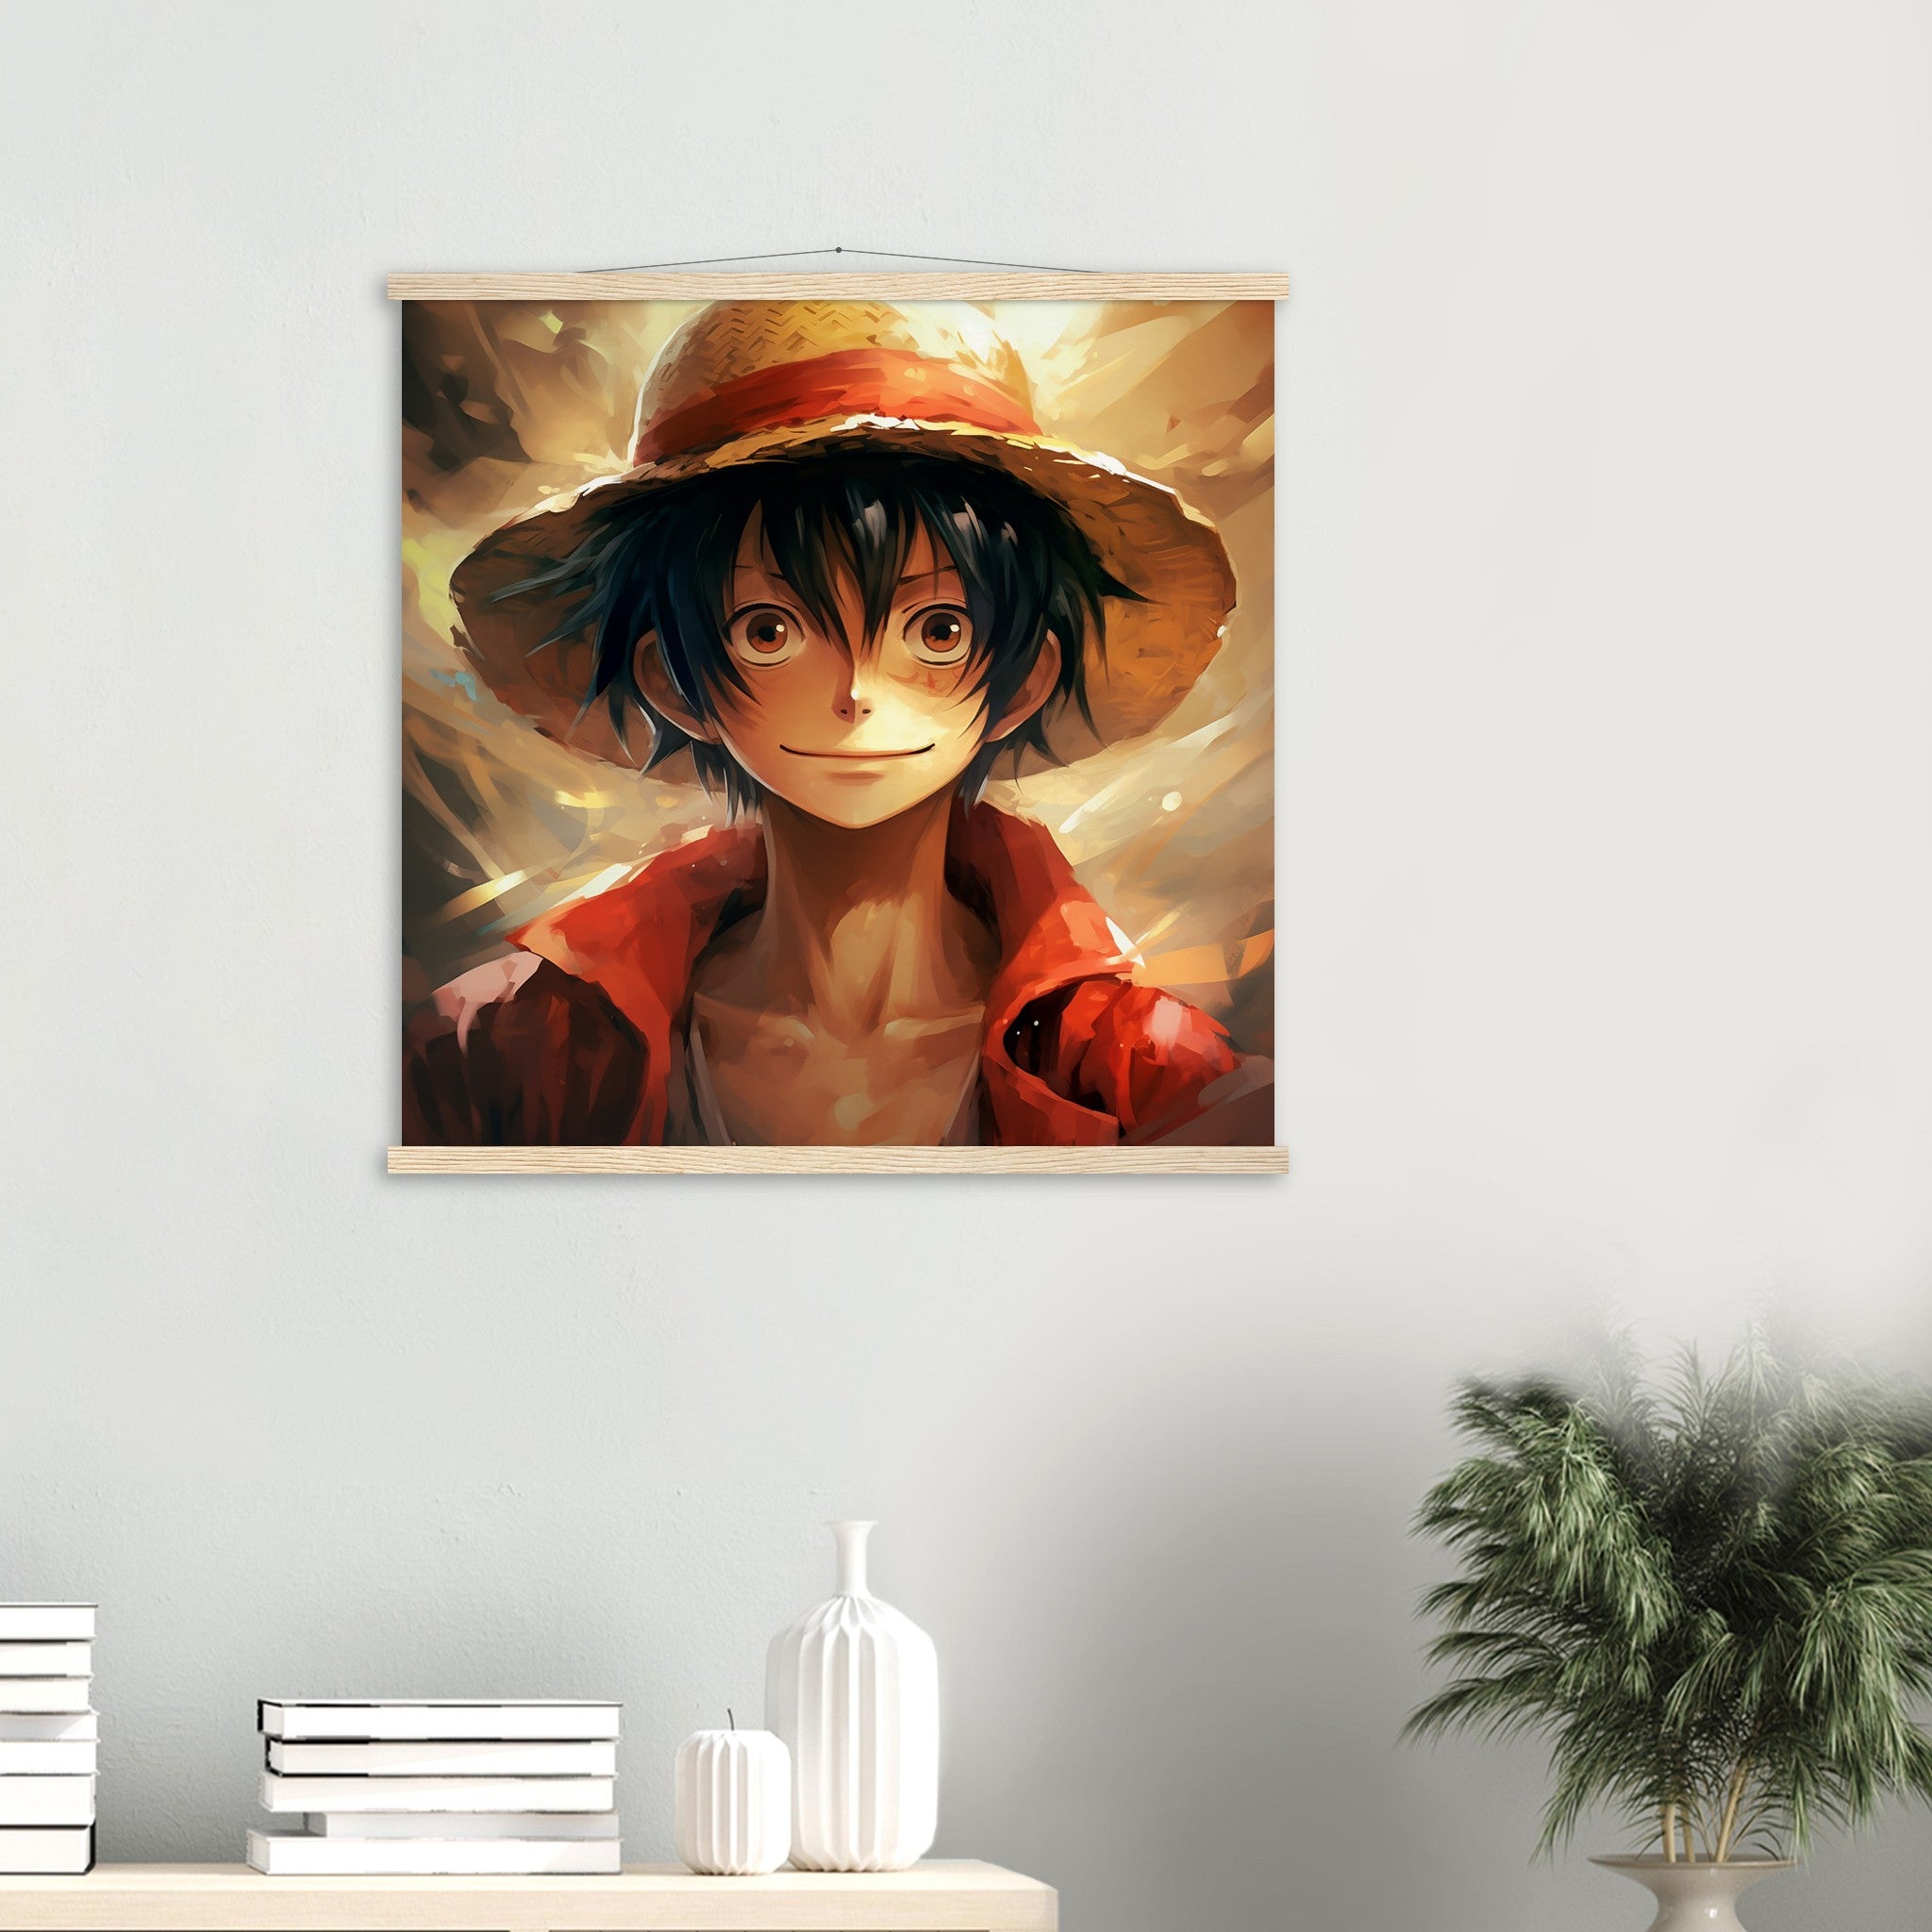 The Monkey D Luffy Japanese wall art for One Piece fans wanting to decorate their room